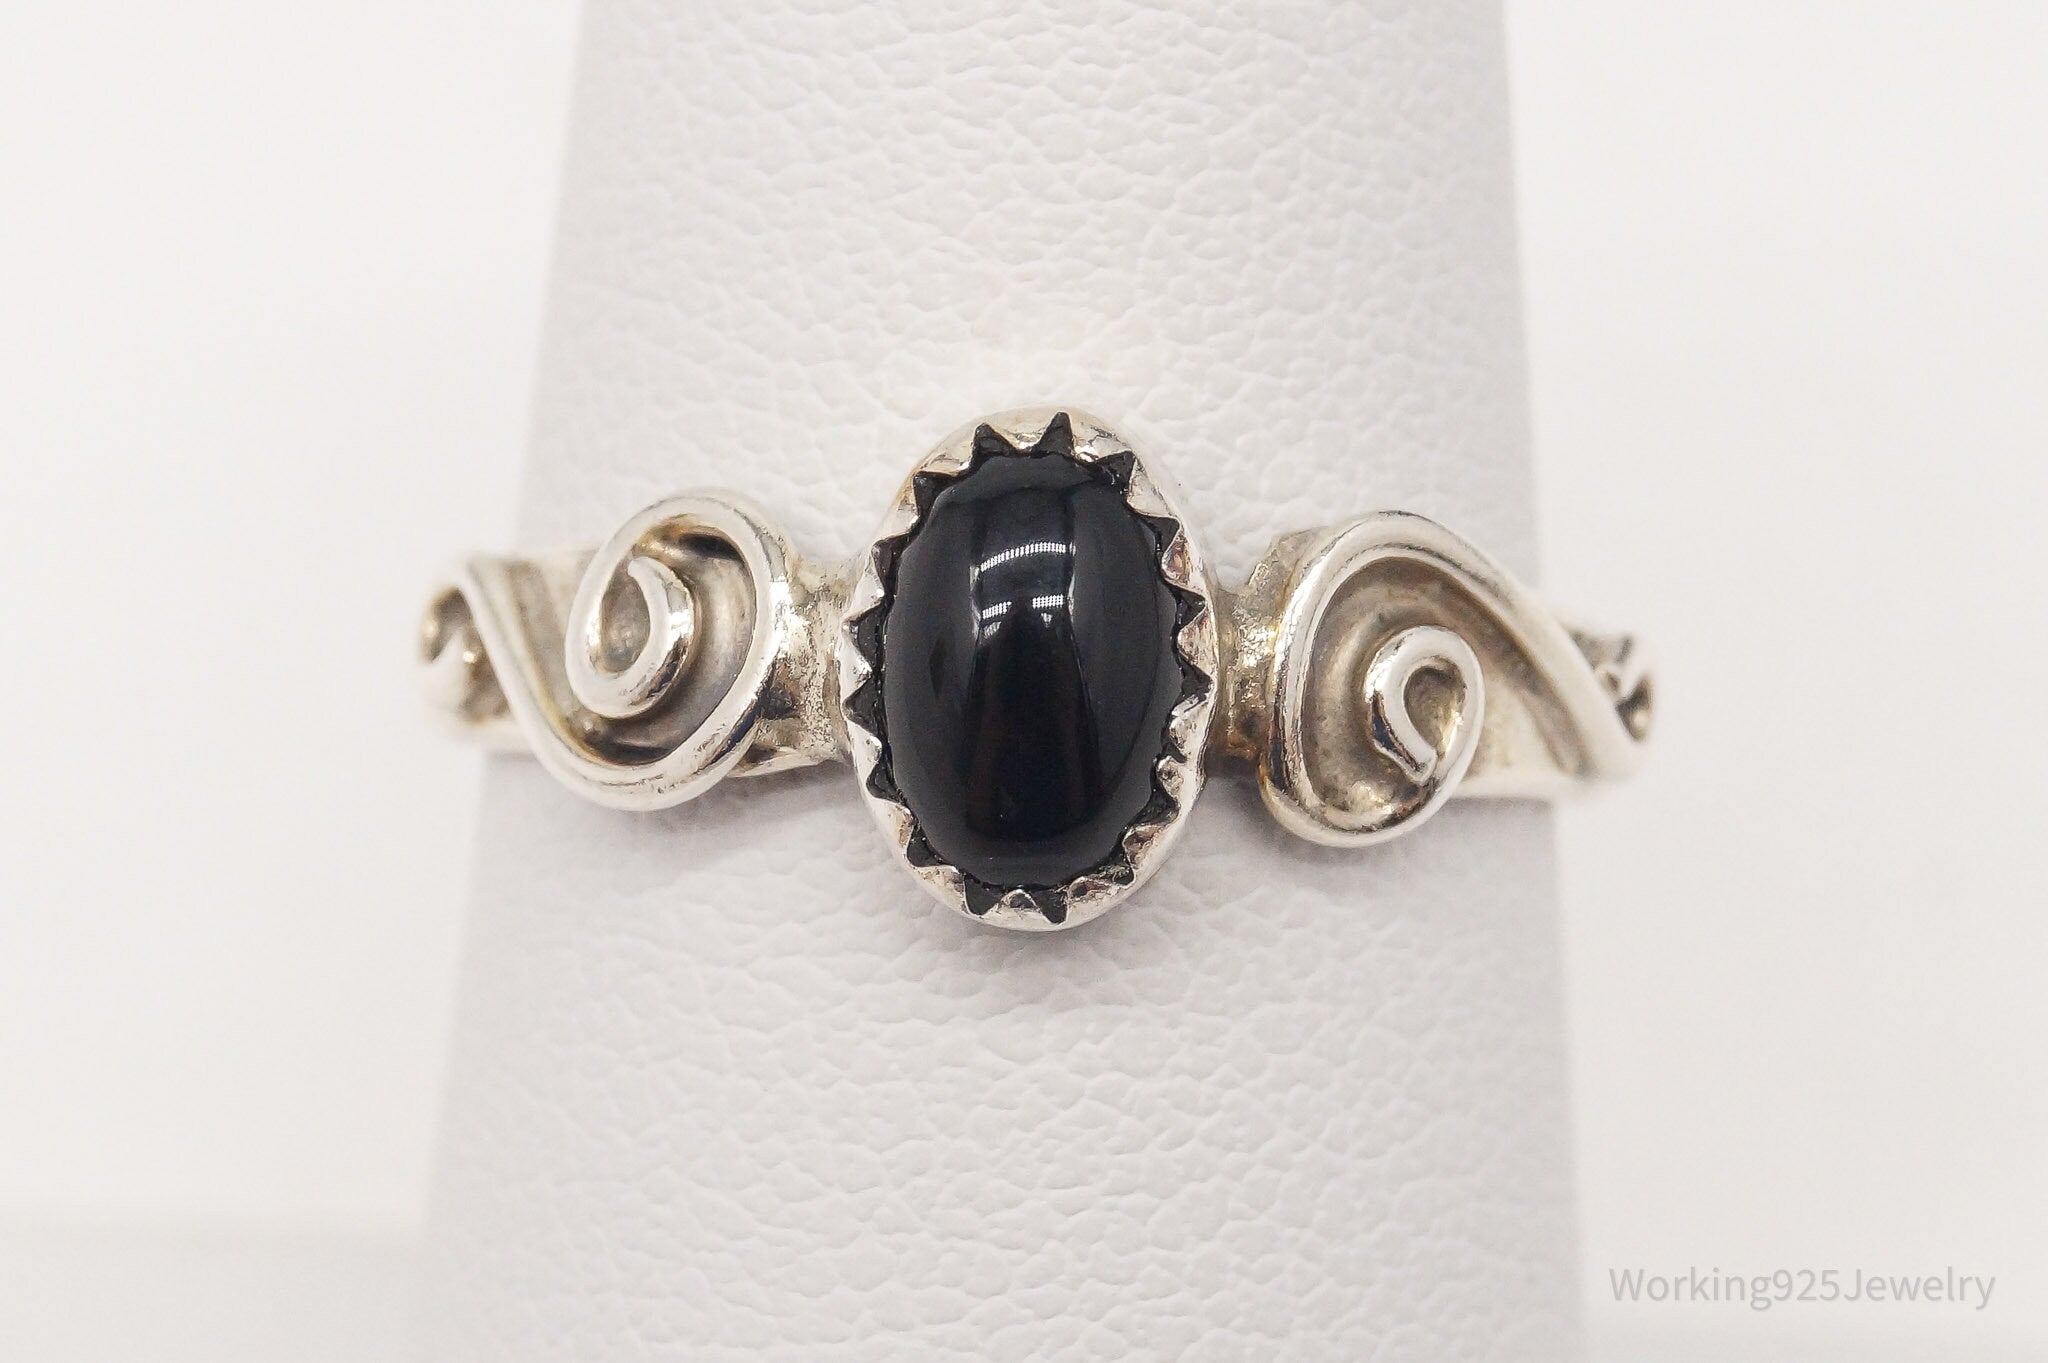 Vintage Native American Black Onyx Sterling Silver Ring Size 7.25